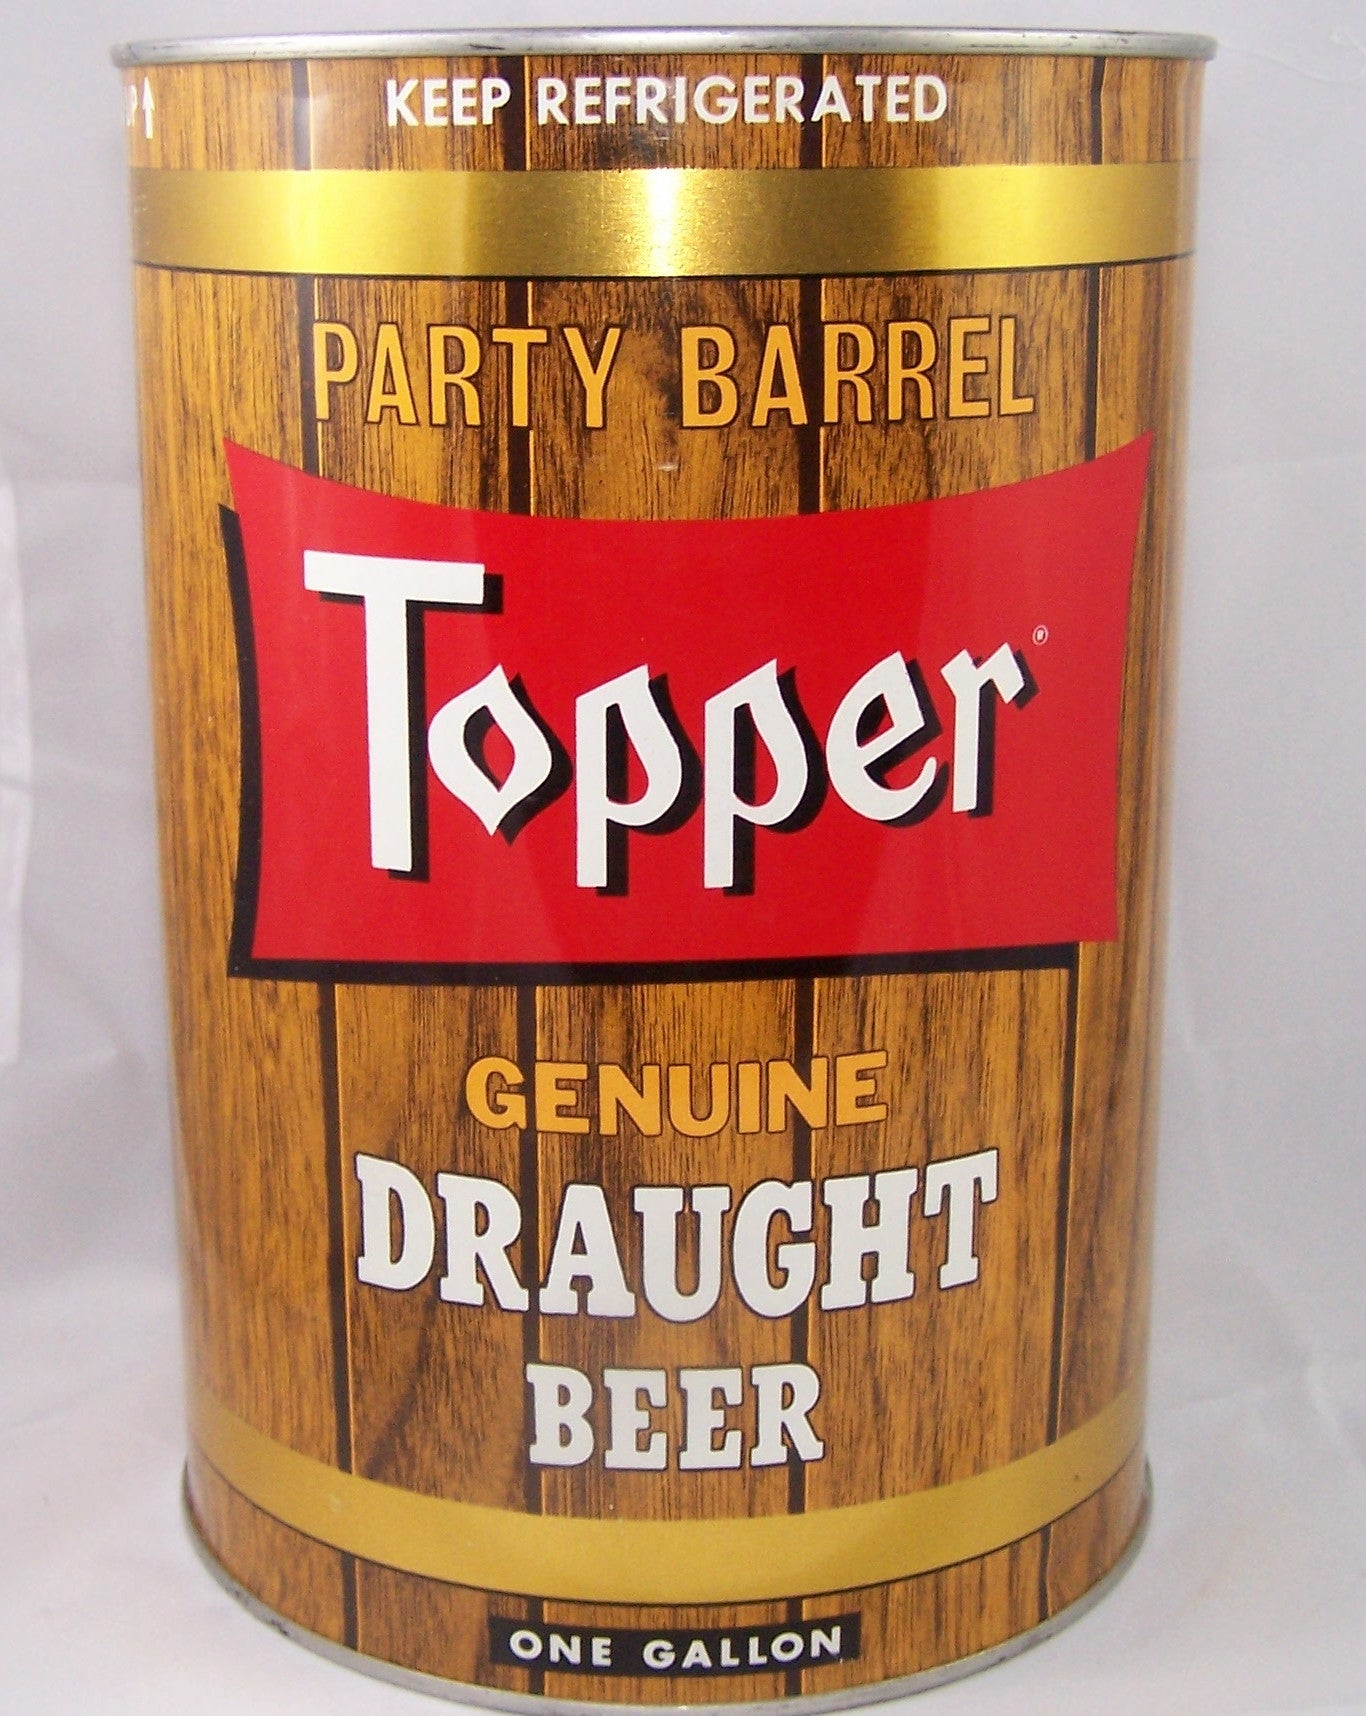 Topper Genuine Draught Beer, USBC 246-12, Grade A1+